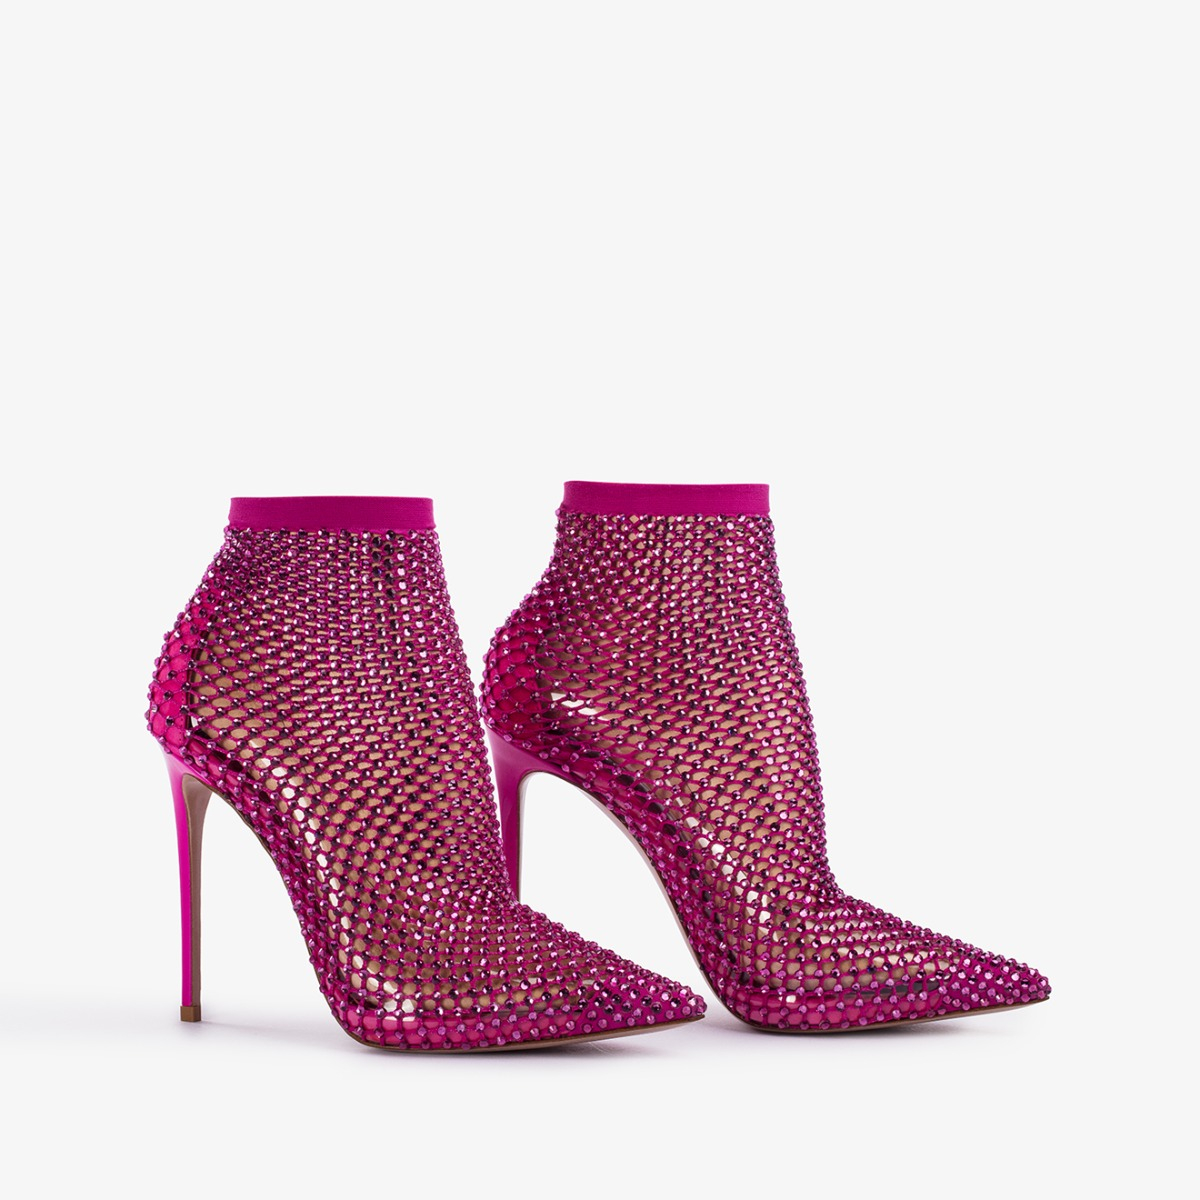 GILDA ANKLE BOOT 120 mm - Le Silla official outlet